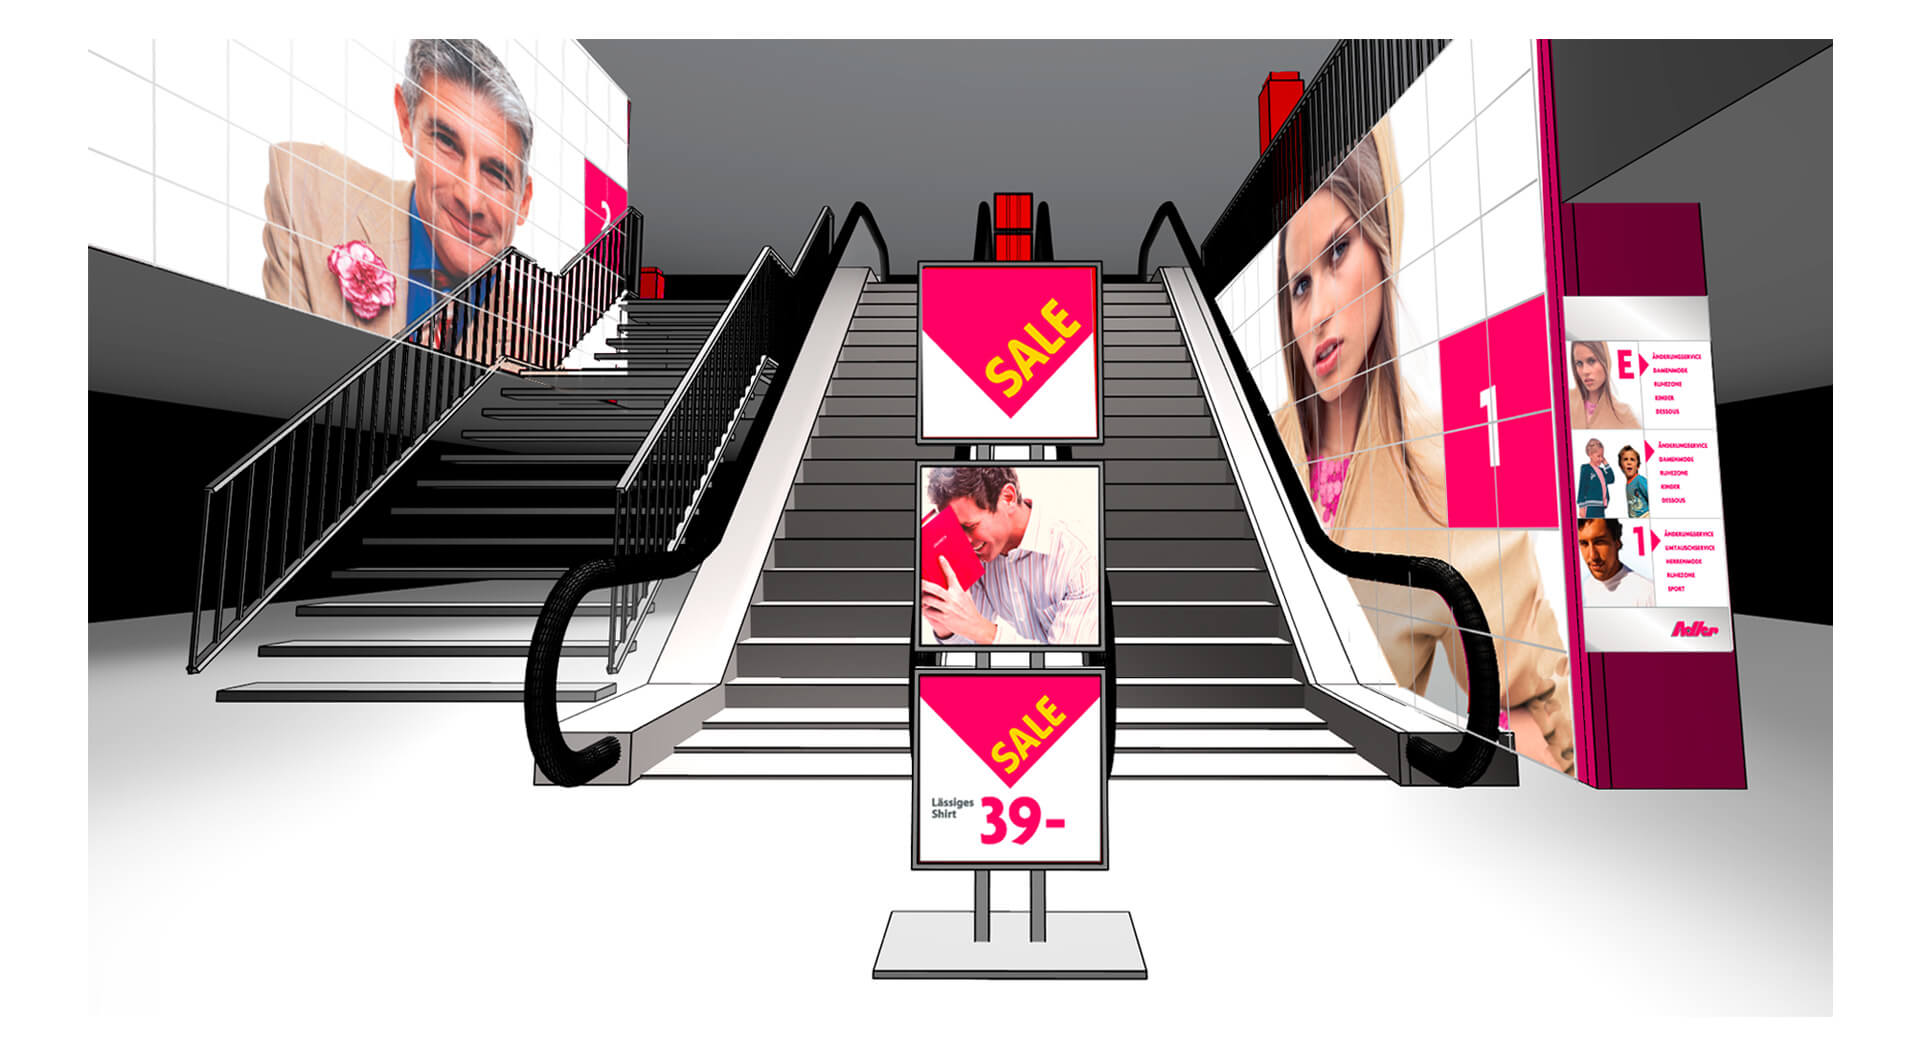  Adler Fashion Store Germany visual of retail store interior design escalator sales promotion and navigation